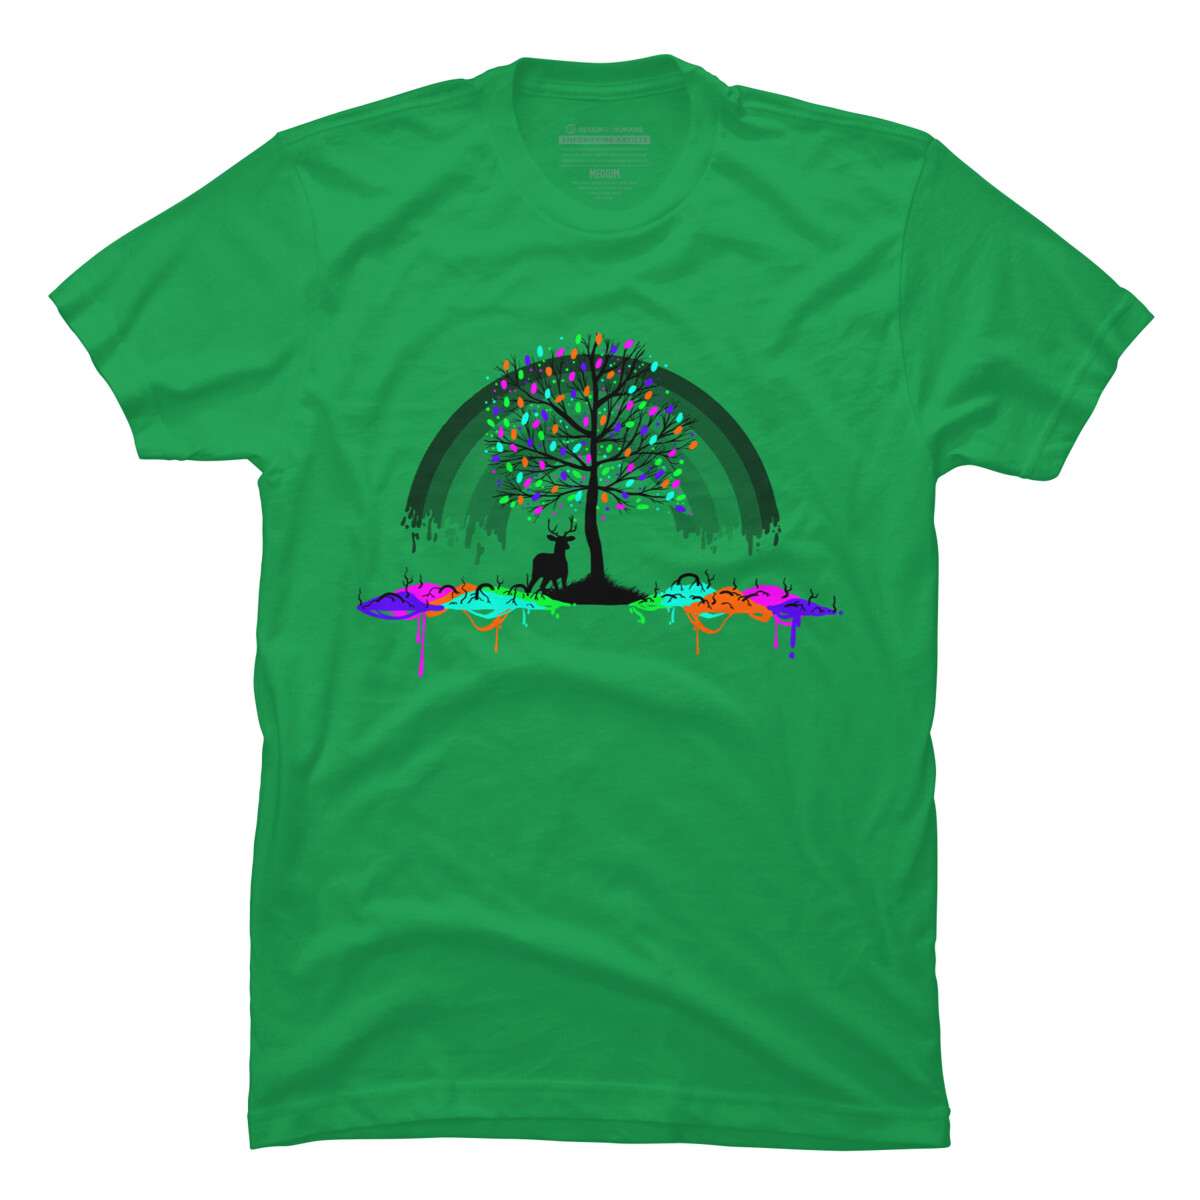 Melting Colors Parasite Mens Kelly Green Graphic Tee - Design By Humans  3XL - image 1 of 4